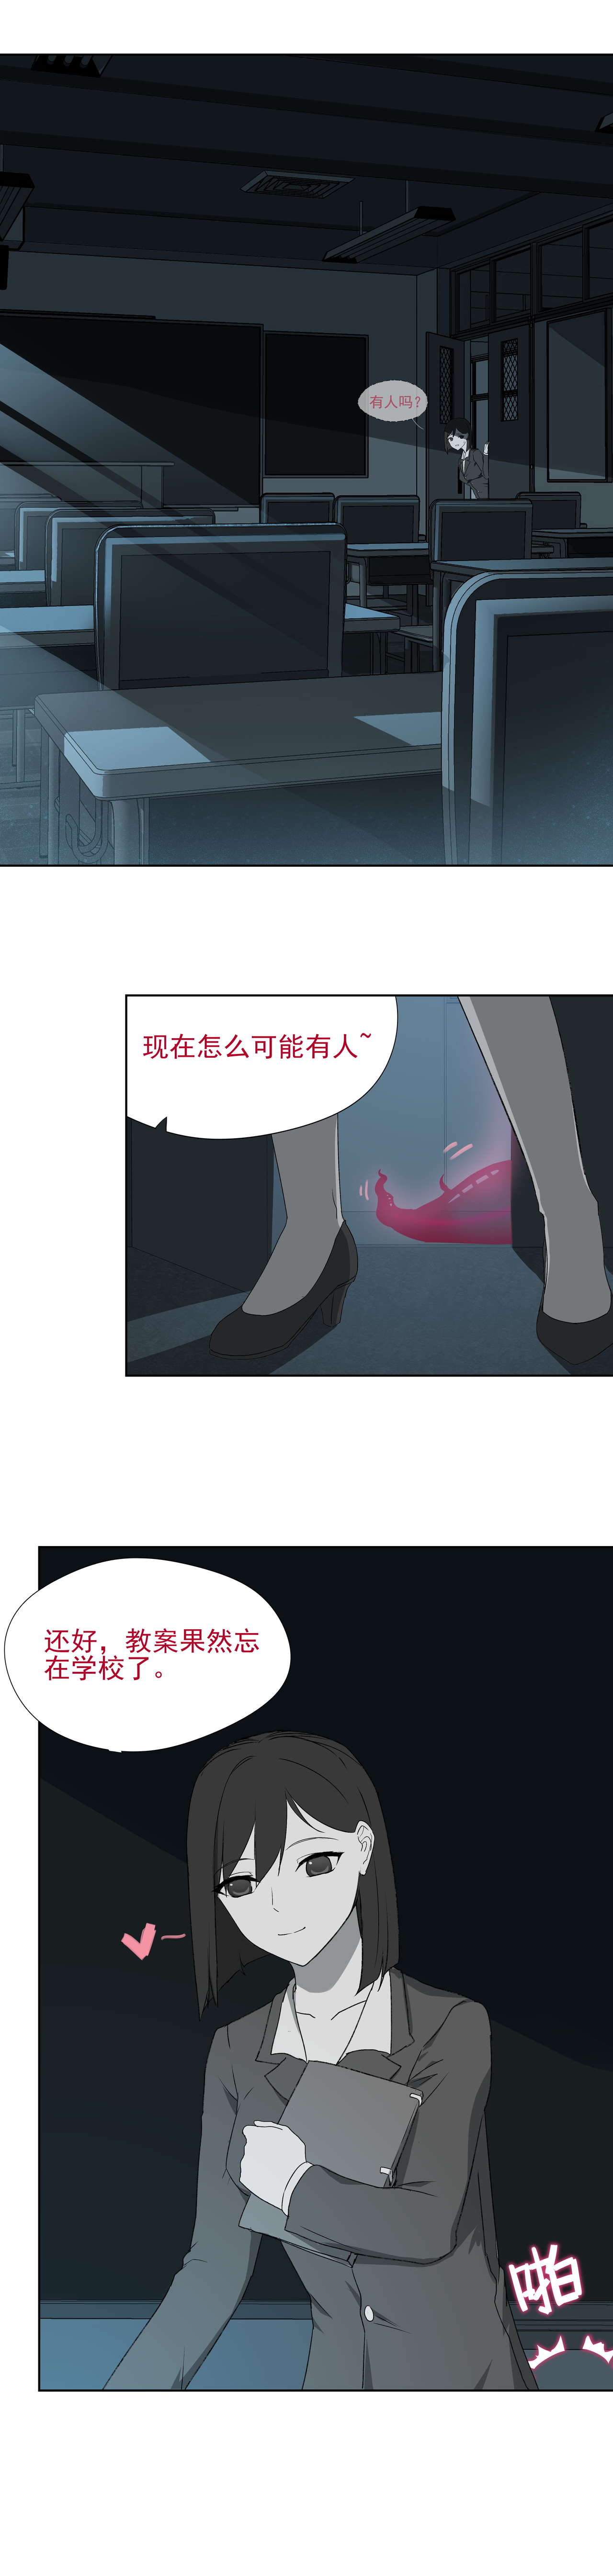 [7T-黑夜的光] 寄生之恋 Tentacle love [Chinese] page 3 full